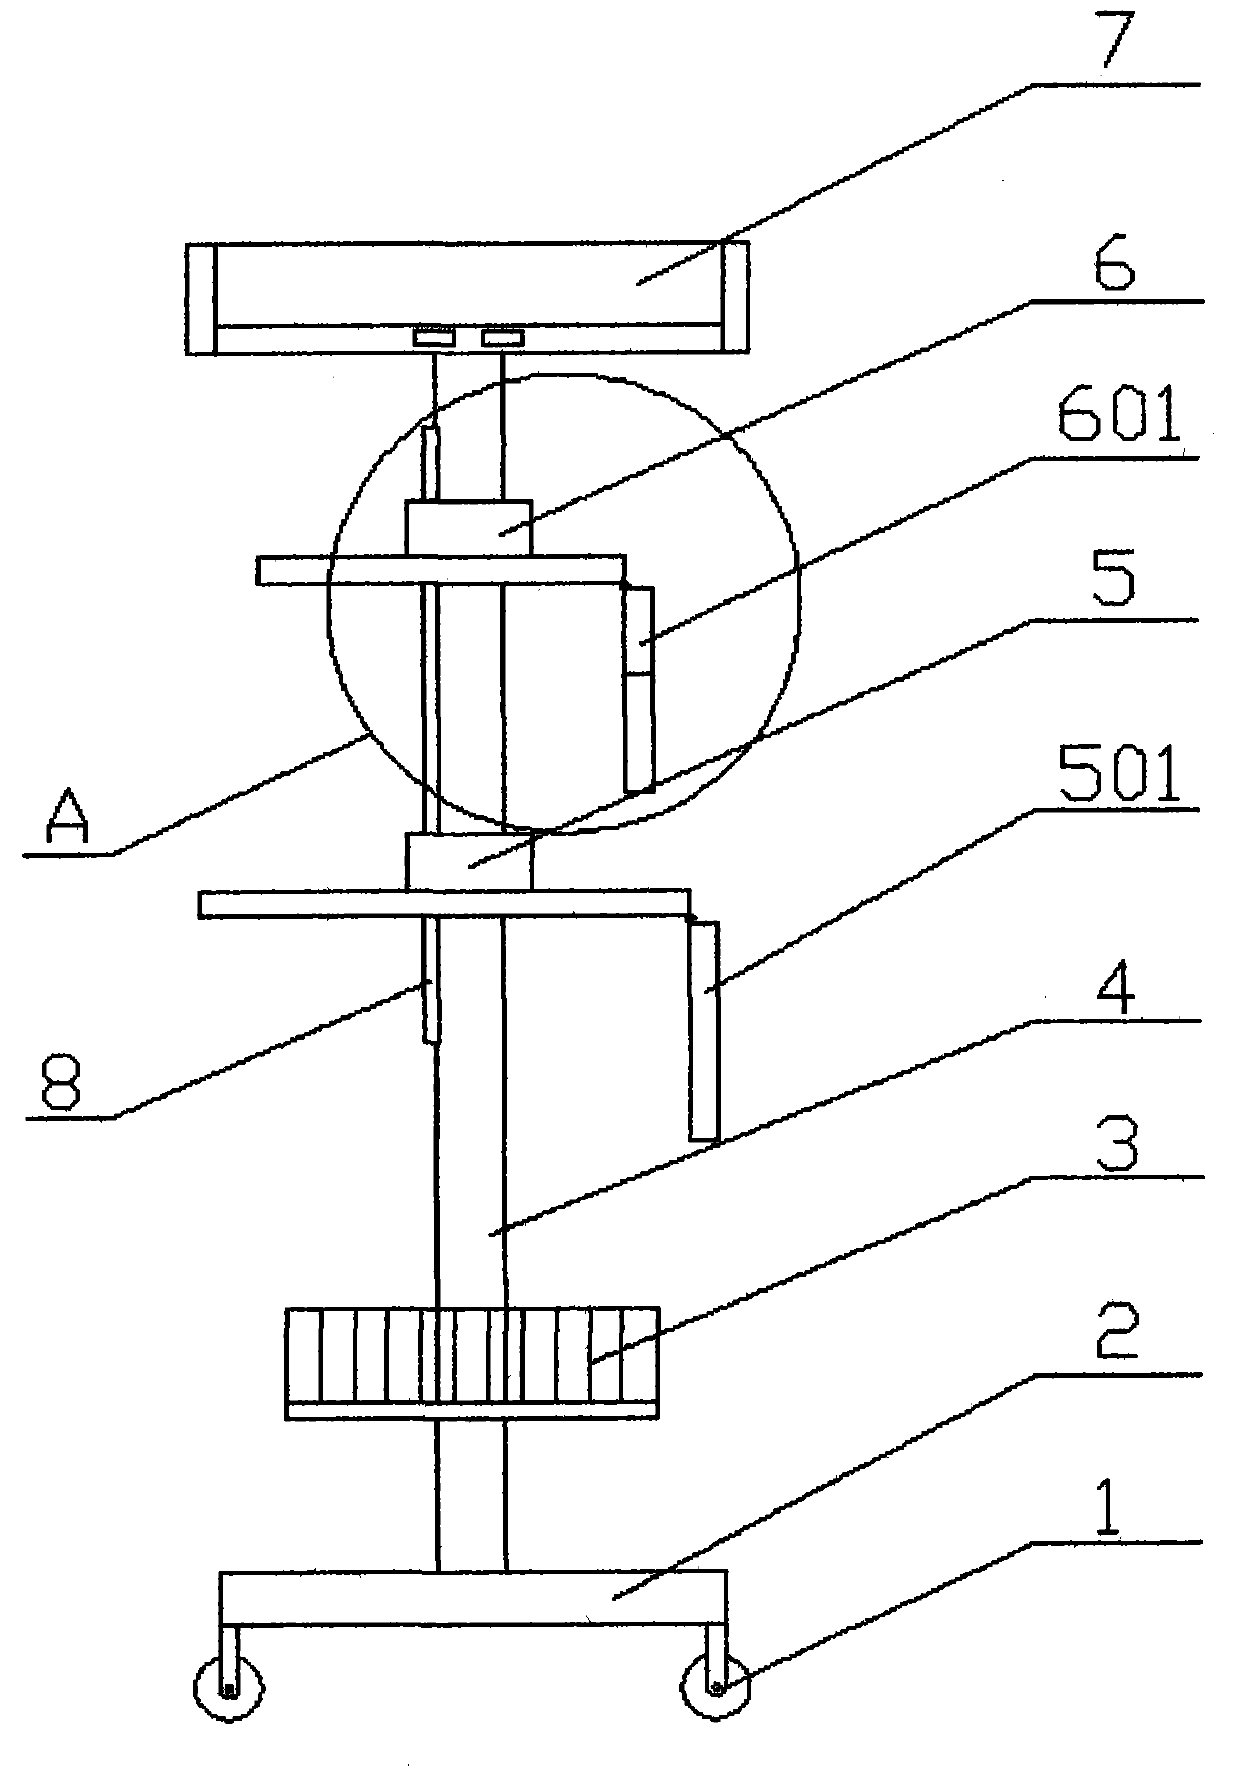 Mobile PICC (Peripherally Inserted Central Catheter) cathetering treatment frame